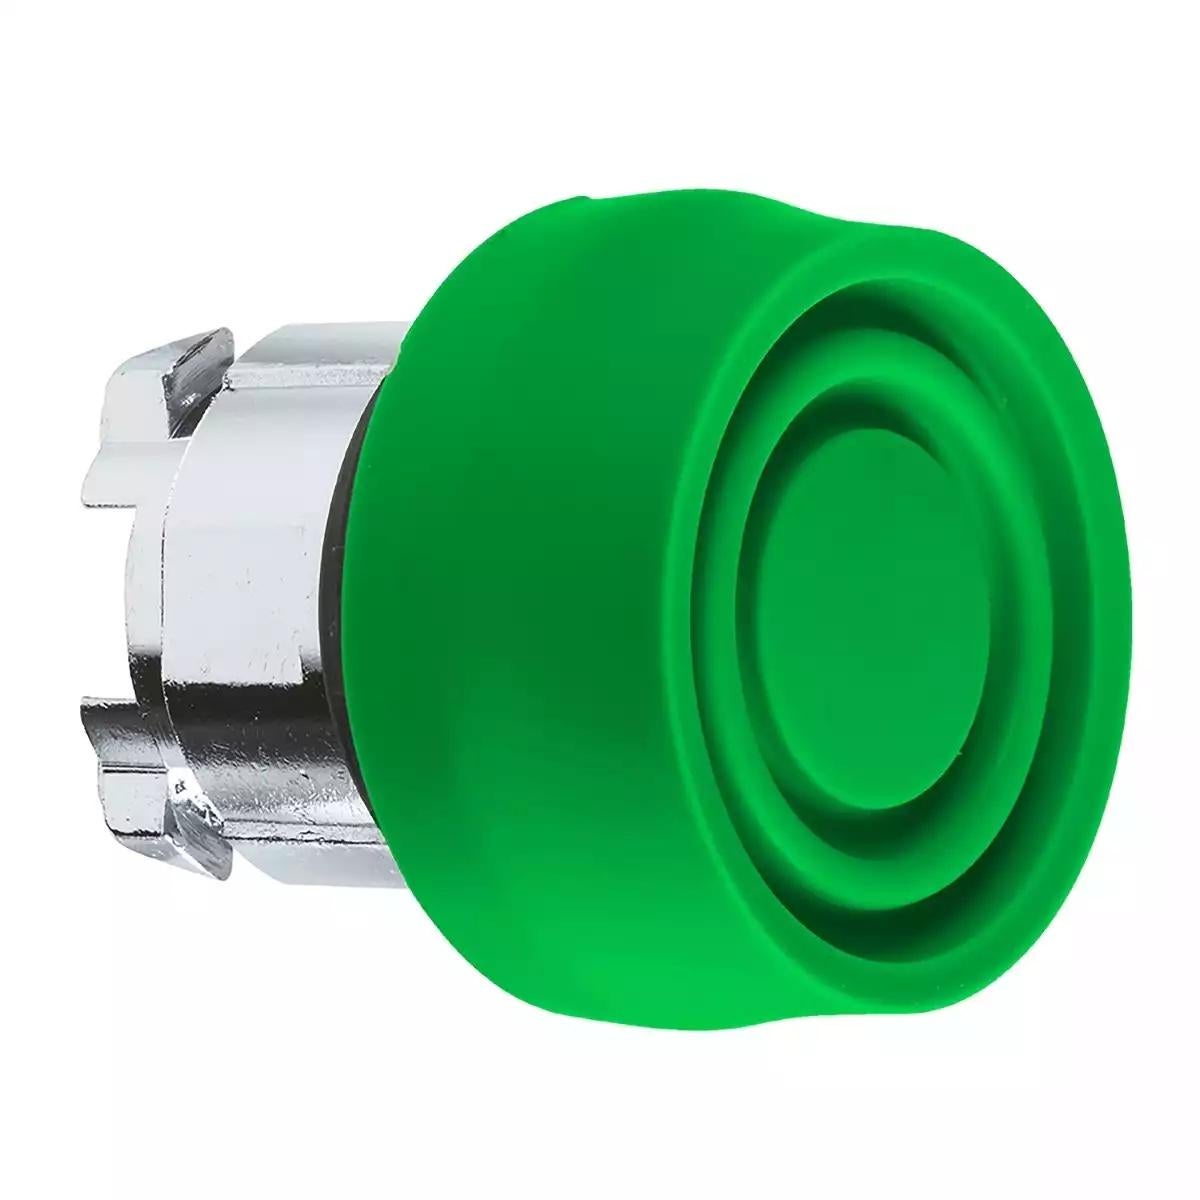 Push button head, Harmony XB4, metal, flush, green, 22mm, spring return, coloured boot, unmarked